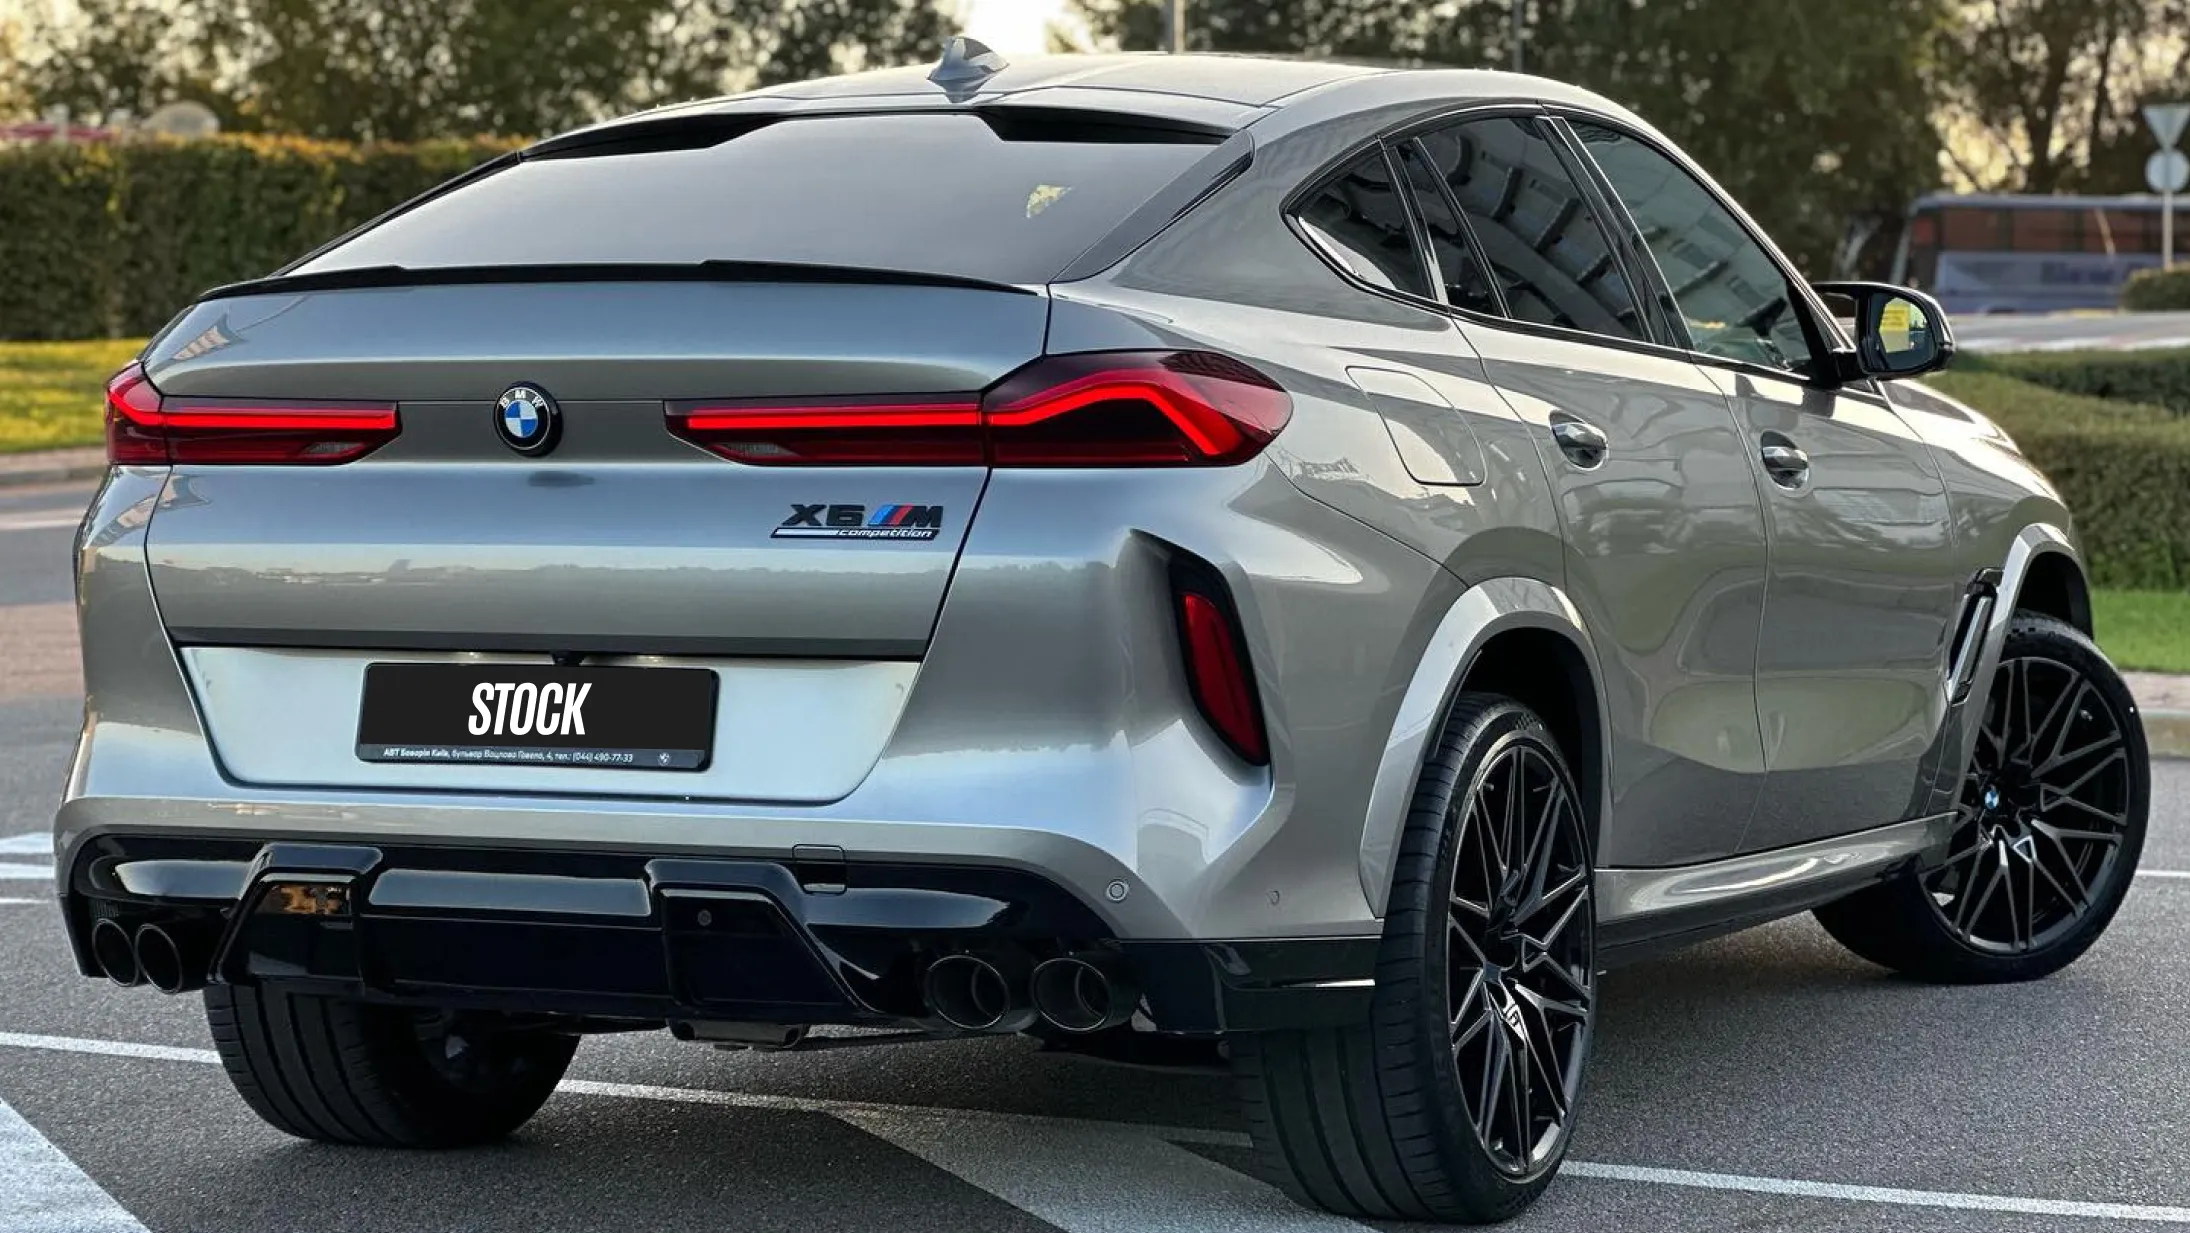 Rear angle view on a BMW X6M with a body kit giving the car a custom appearance